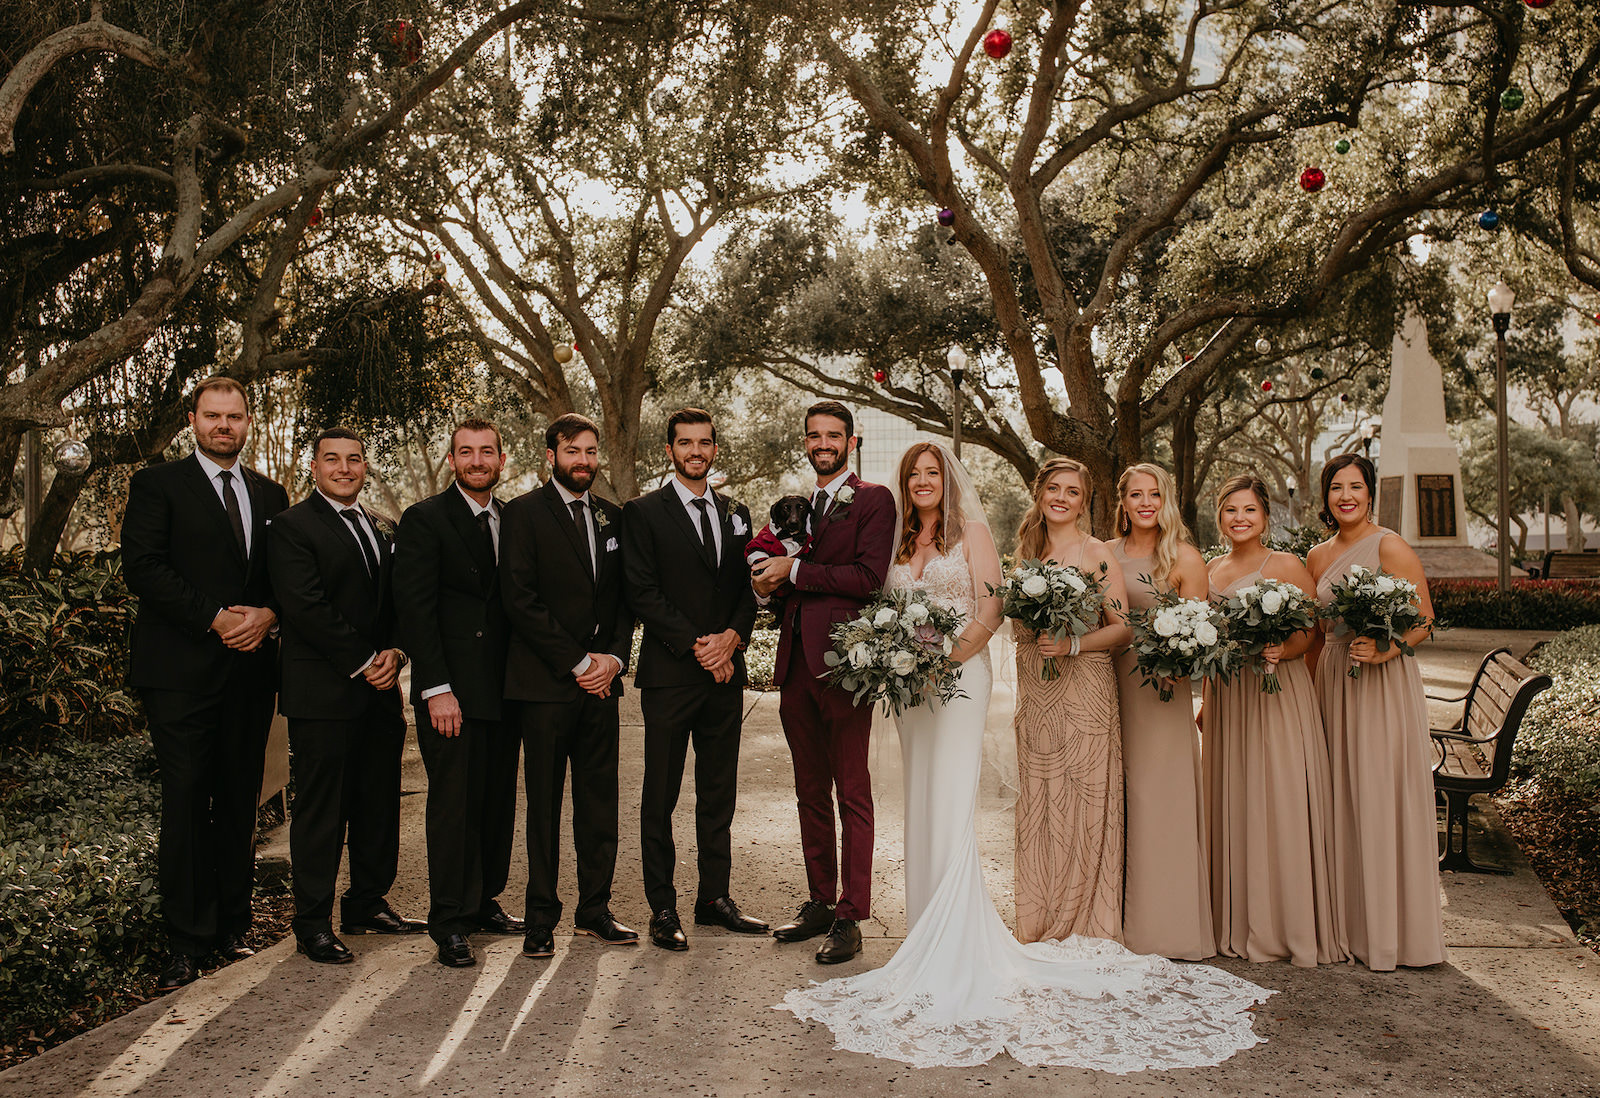 Bridal Party Portrait | Bridesmaids in Neutral Taupe Tan and Groomsmen Black with Burgundy Groom's Suit